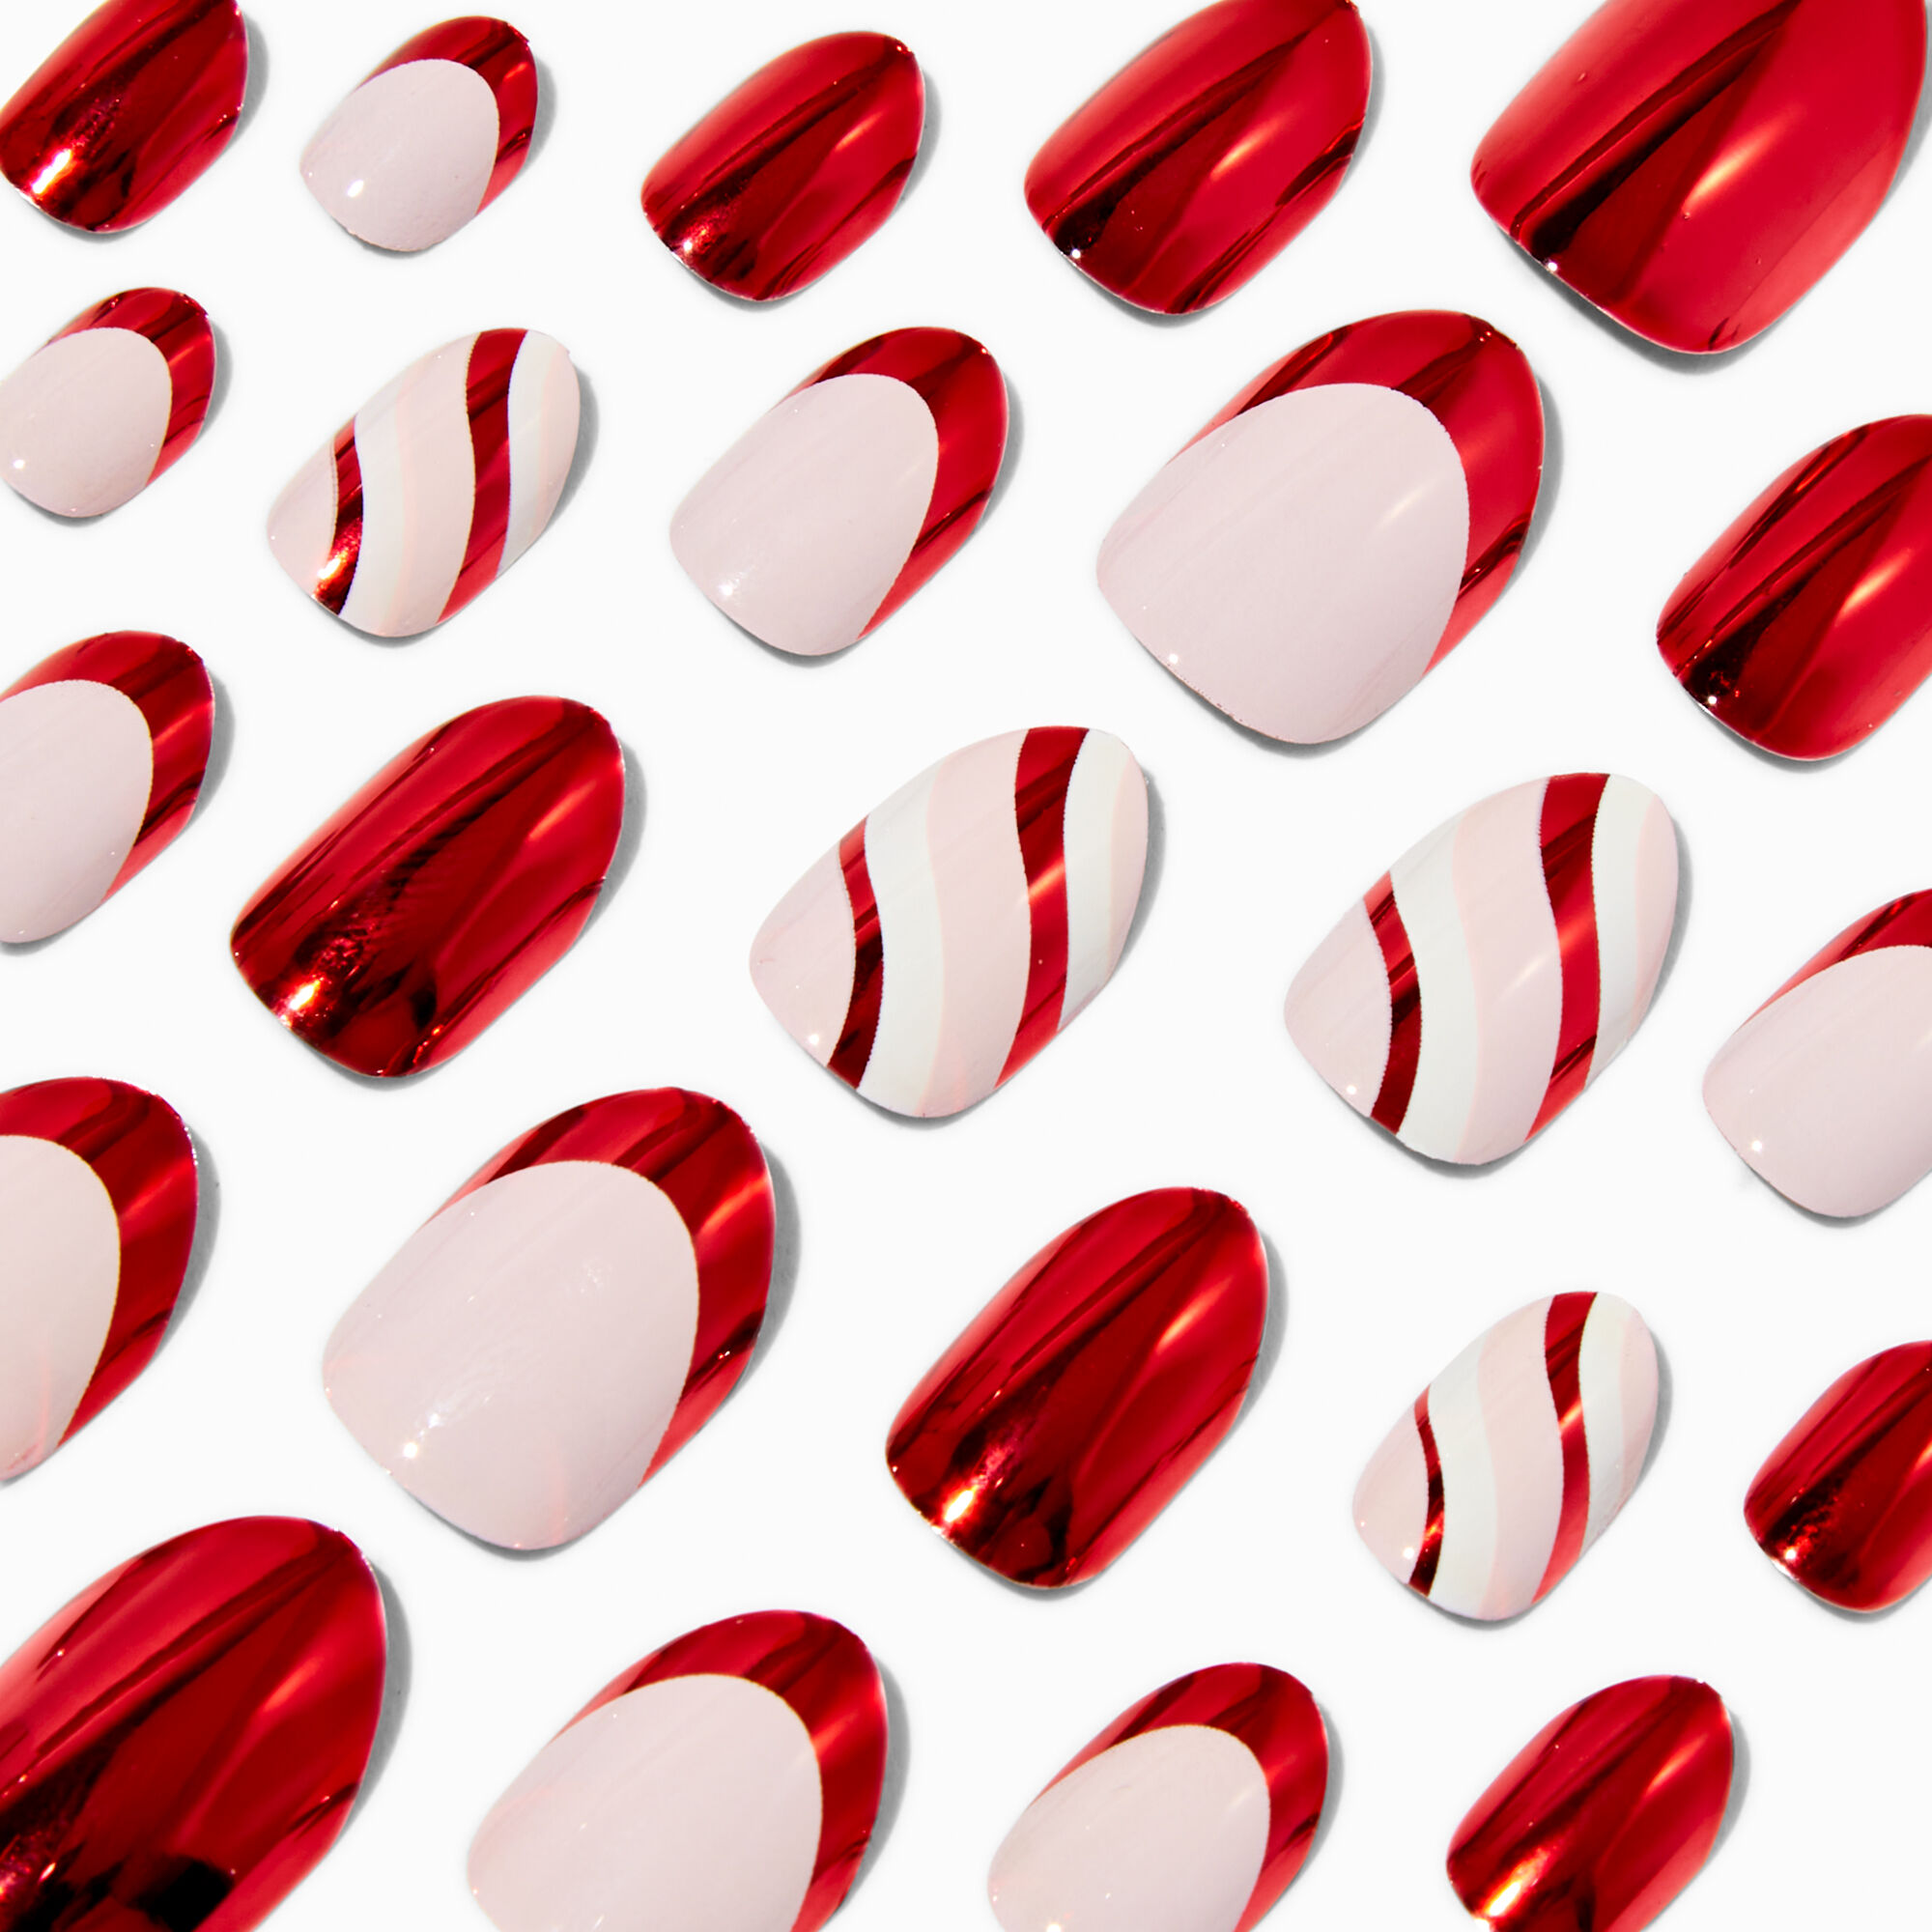 View Claires Chrome Swirl Stiletto Vegan Faux Nail Set 24 Pack Red information